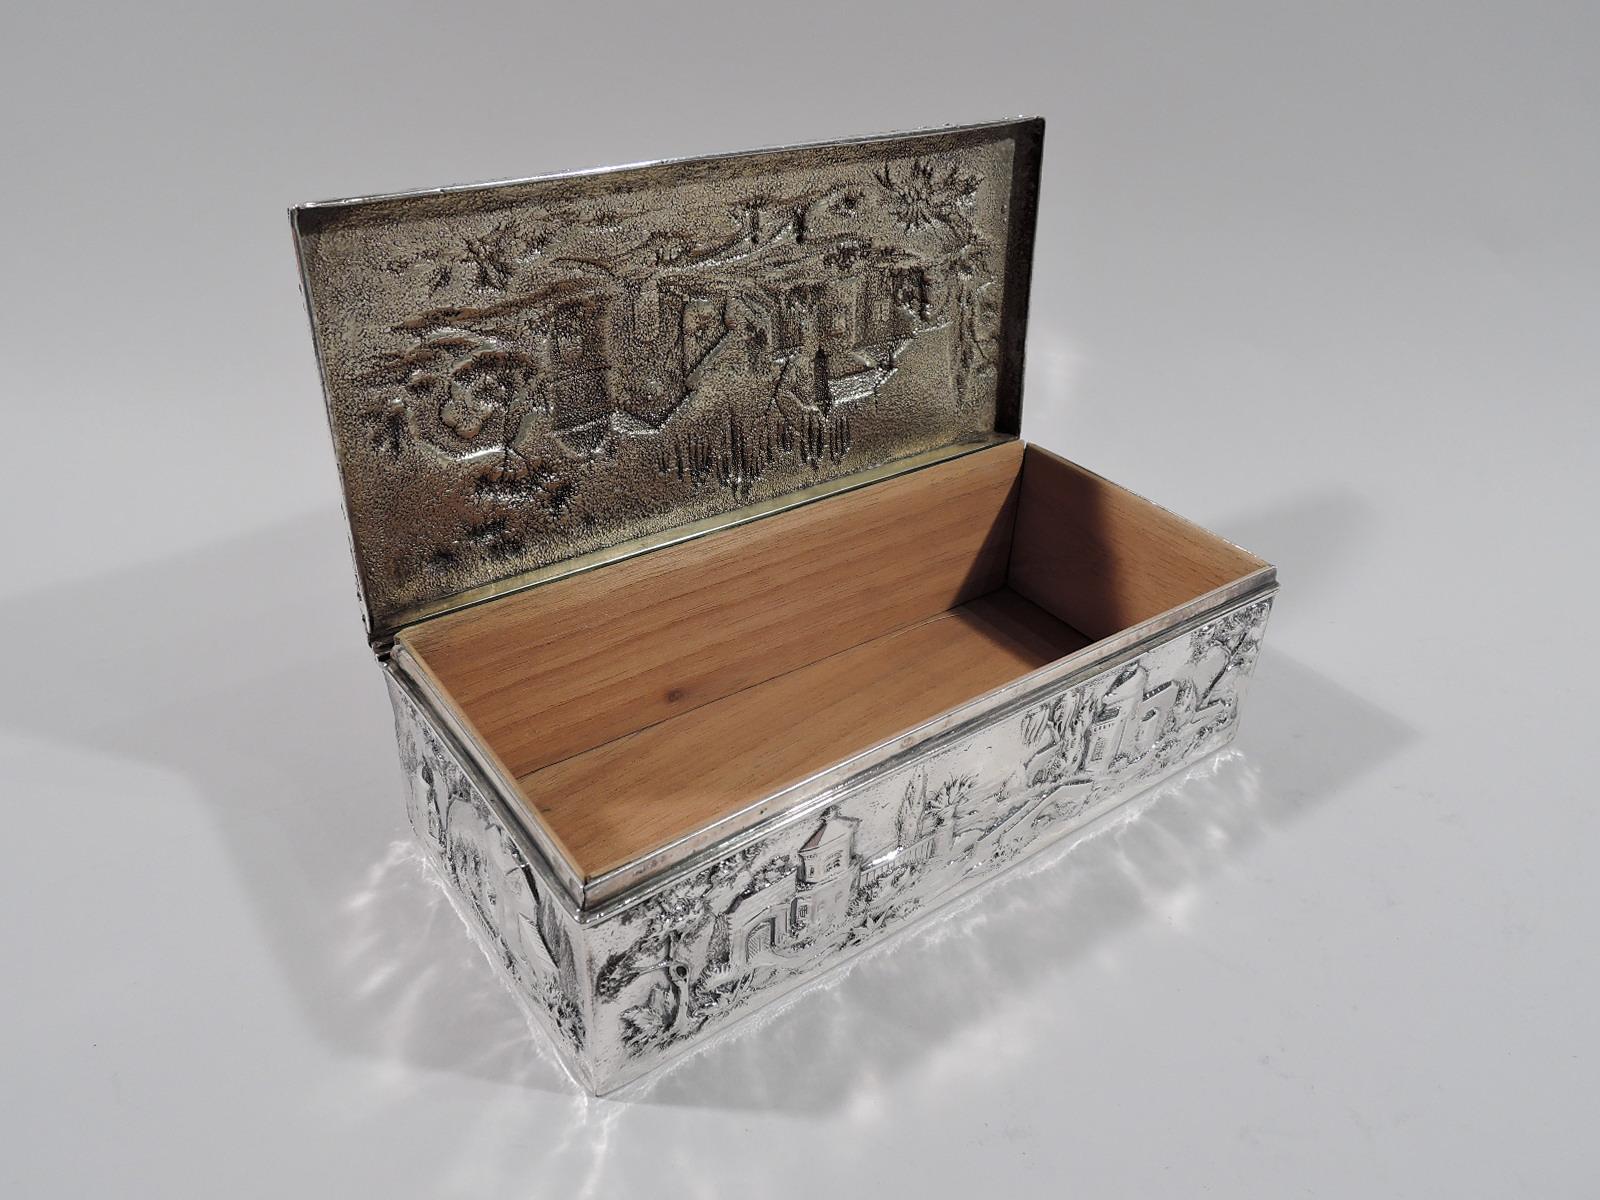 American Antique Kirk Sterling Silver Box with Picturesque Architecture